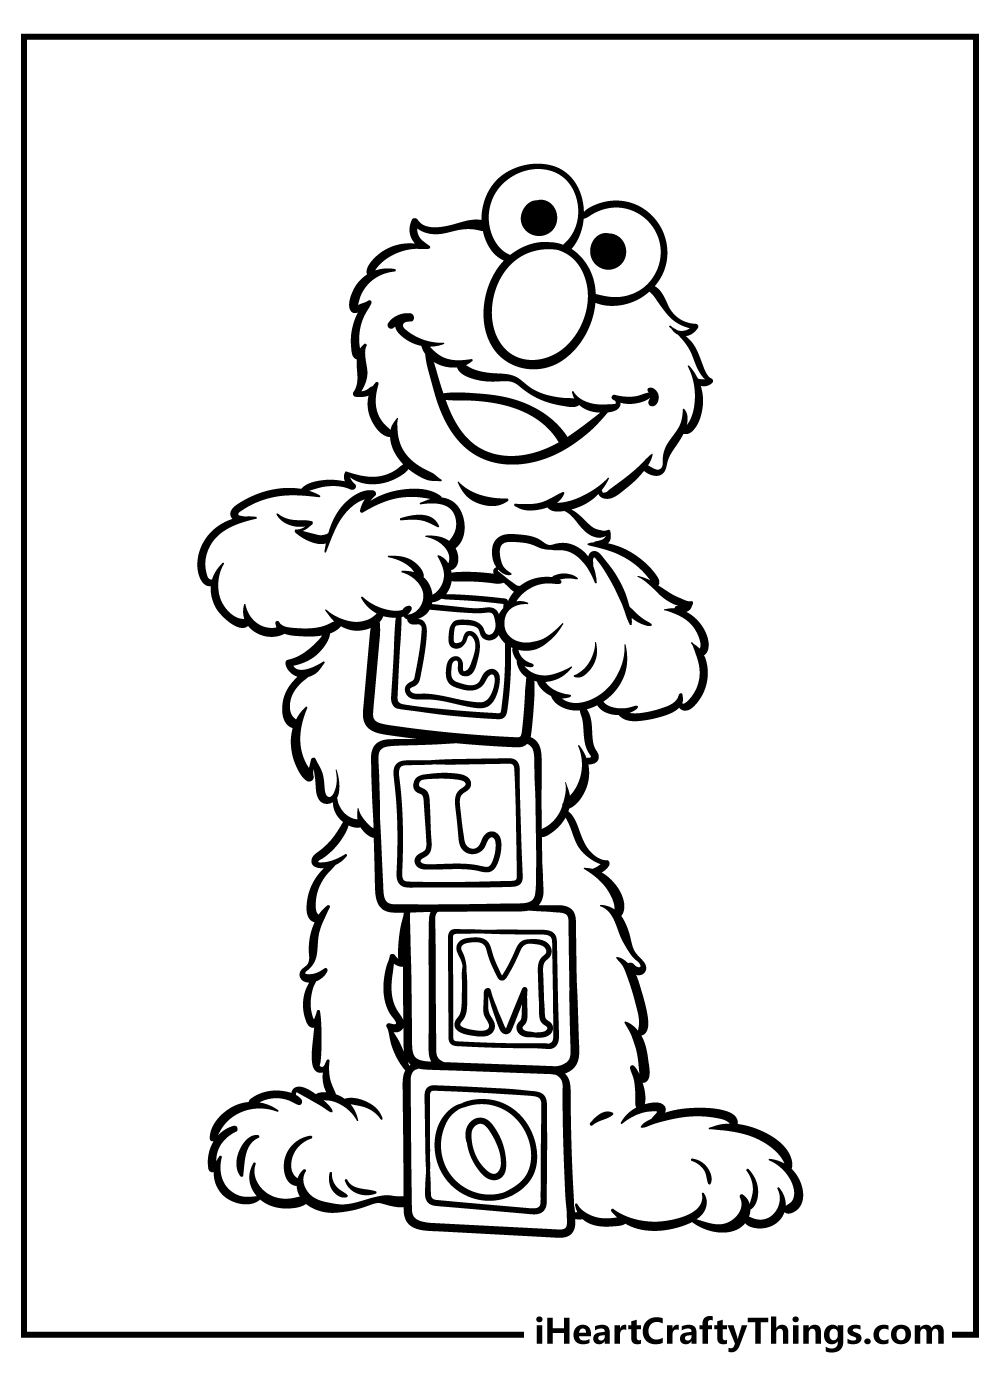 Sesame Street Coloring Book for adults free download